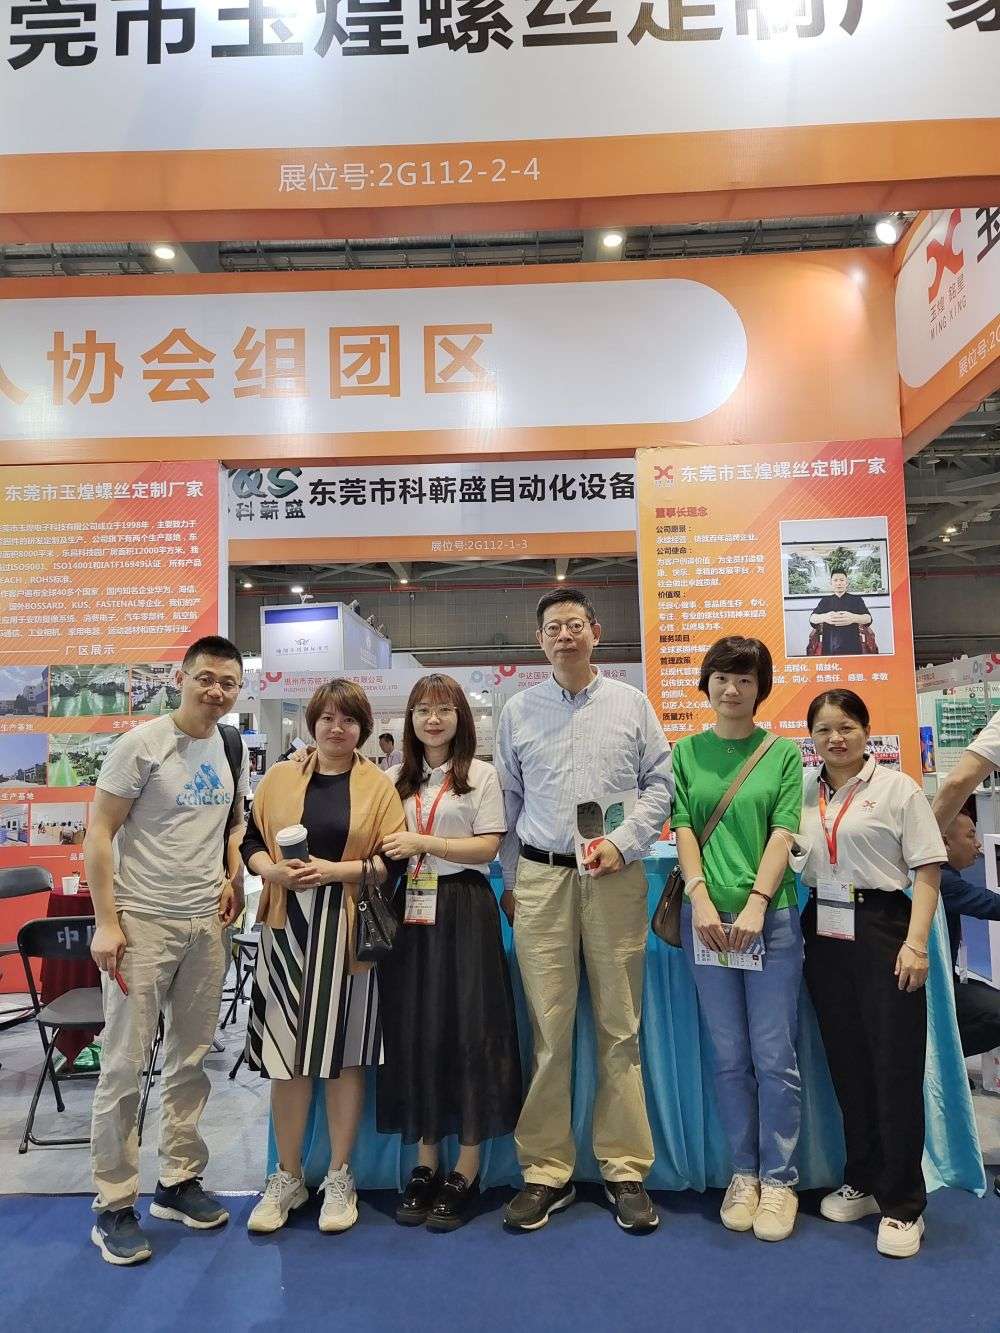 Our Company’s Successful Participation at the Shanghai Fastener Exhibition